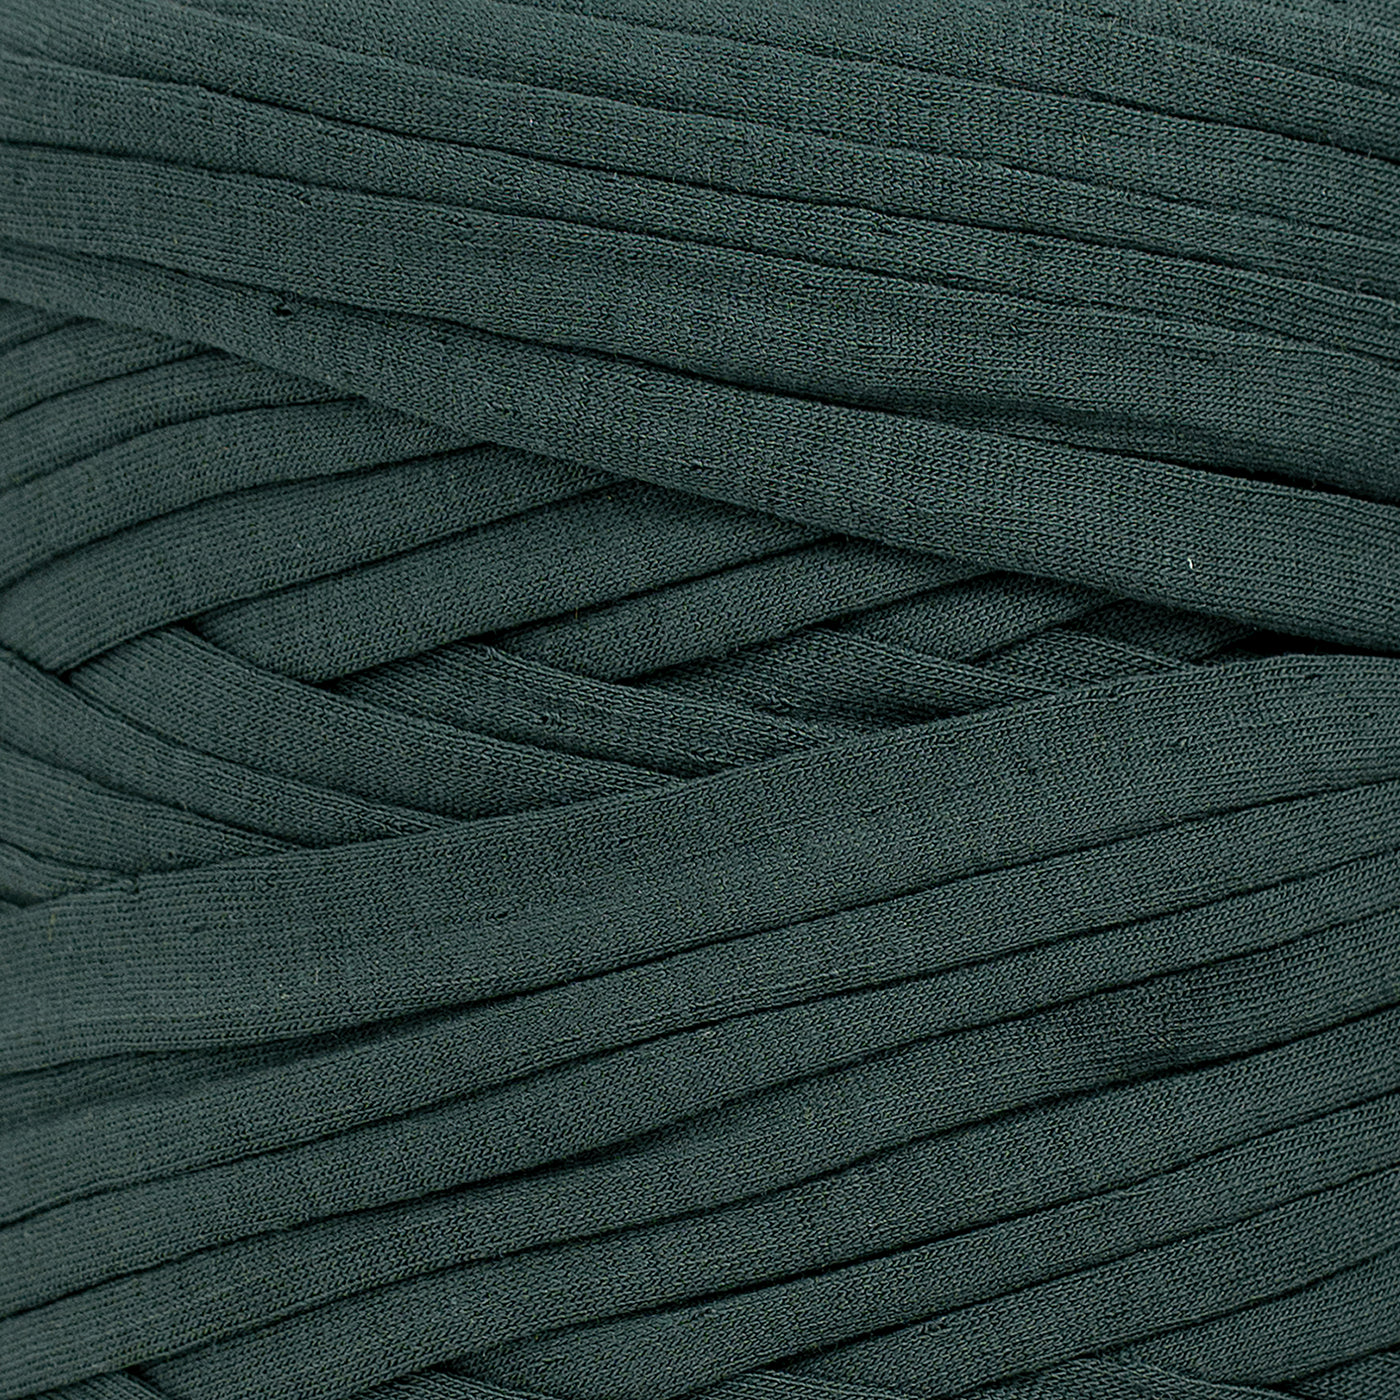 Recycled T-Shirt Fabric Yarn - Pine Green Color